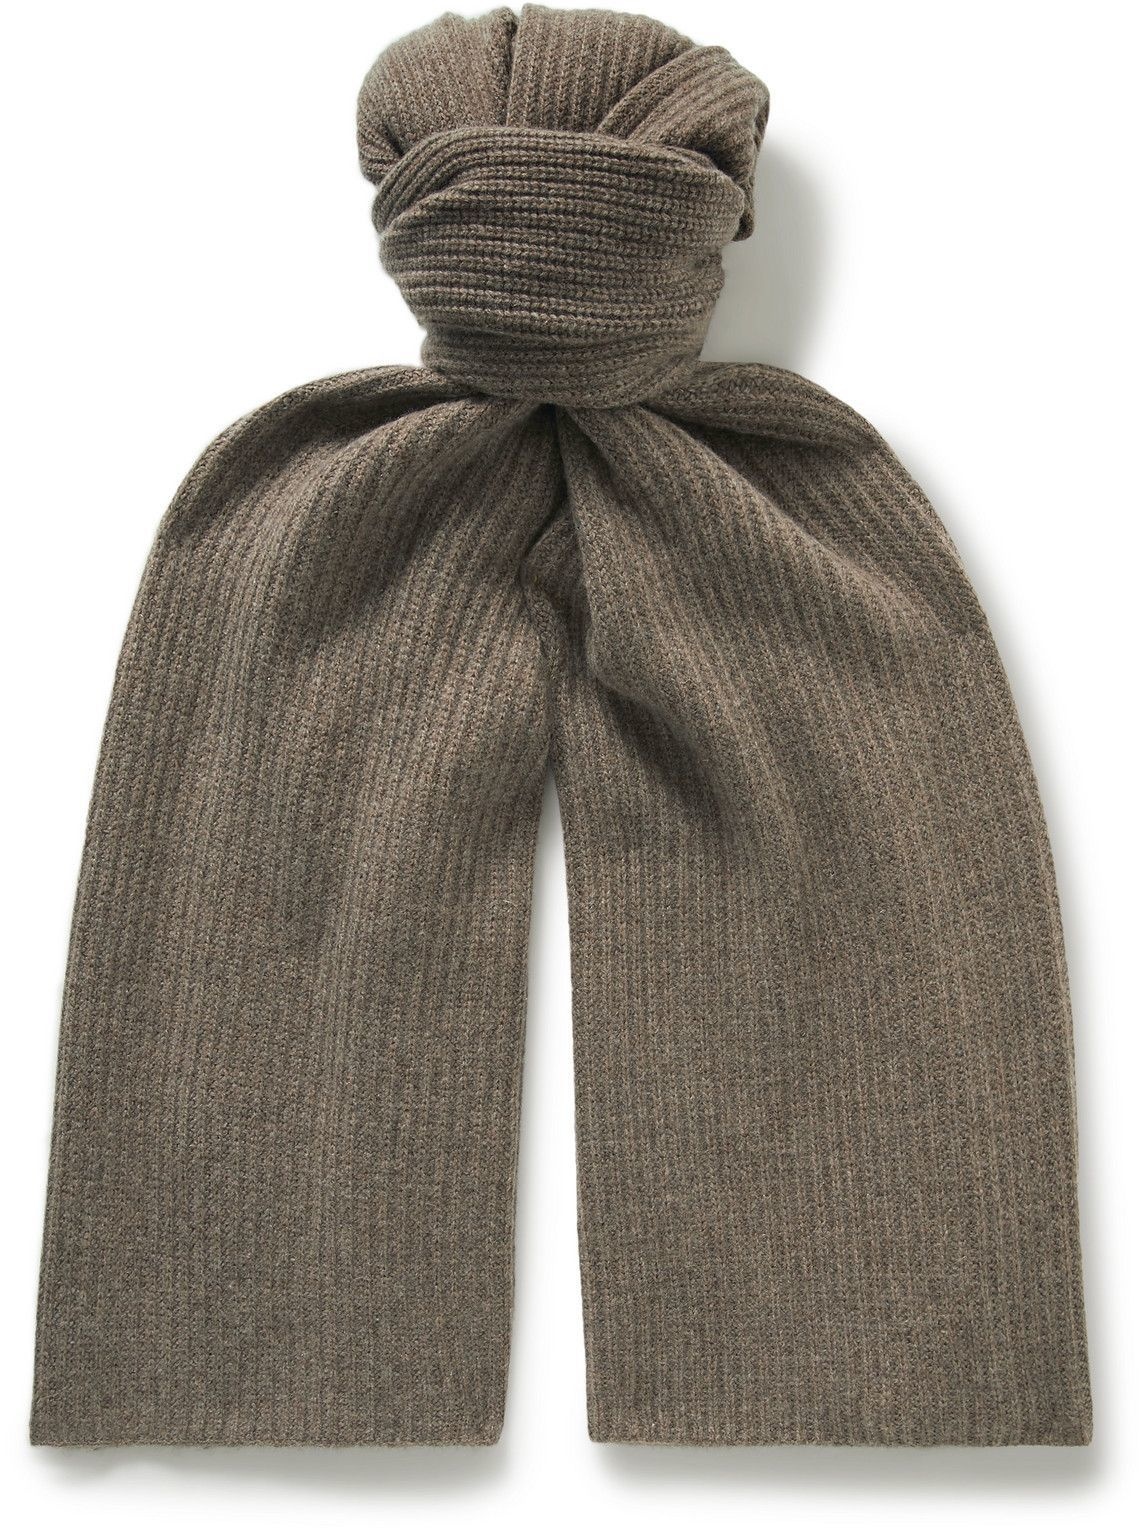 James Perse - Thermal Ribbed Recycled Cashmere Scarf James Perse